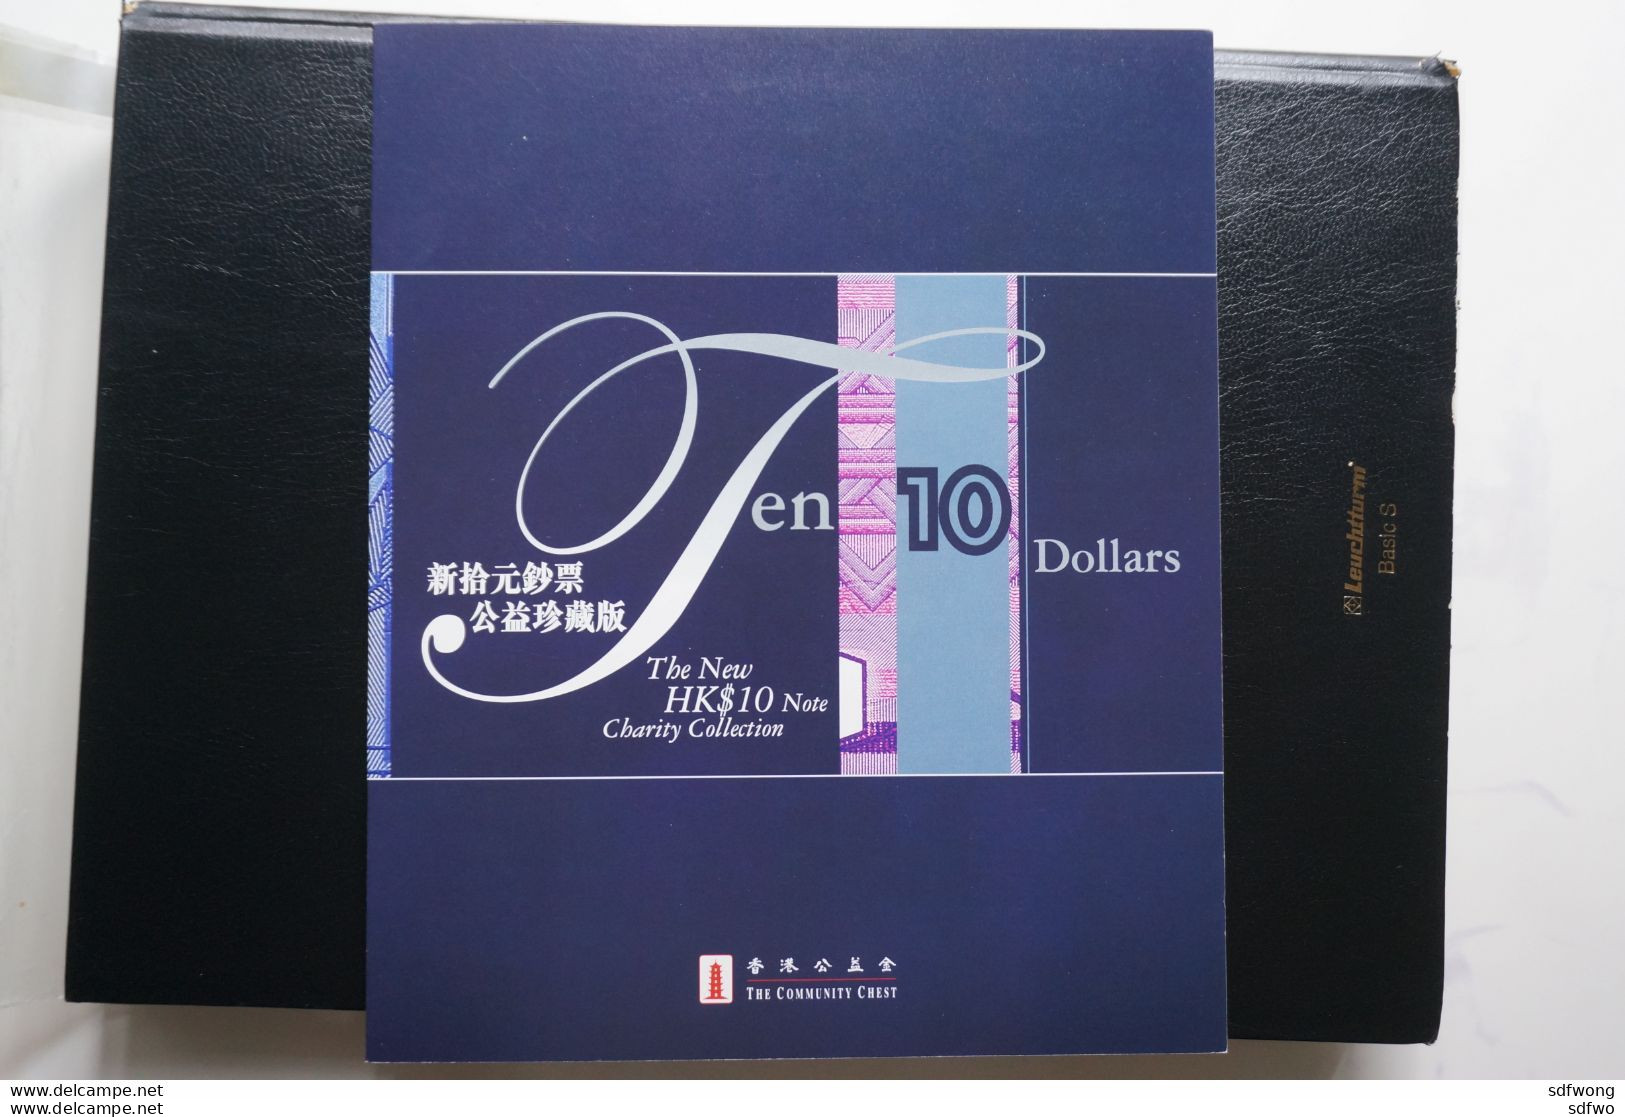 Hong Kong 2002 - New HK$10 Note Charity Collection Issue (3-in-1 Uncut Notes #818338, 828338, 838338) - UNC